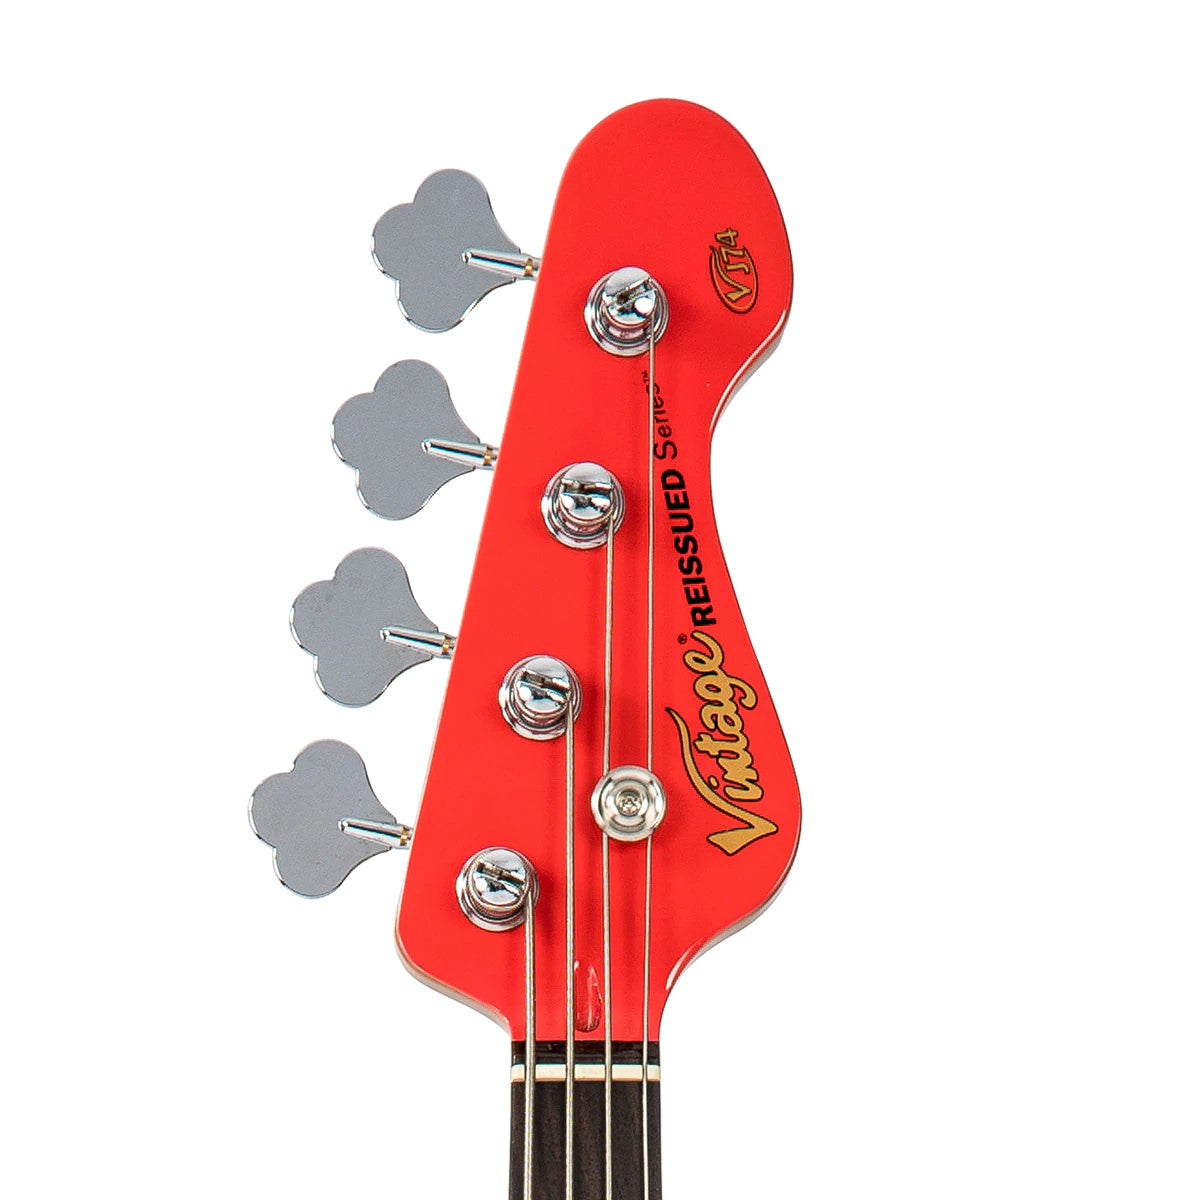 Vintage VJ74 ReIssued Bass ~ Firenza Red, Bass Guitar for sale at Richards Guitars.